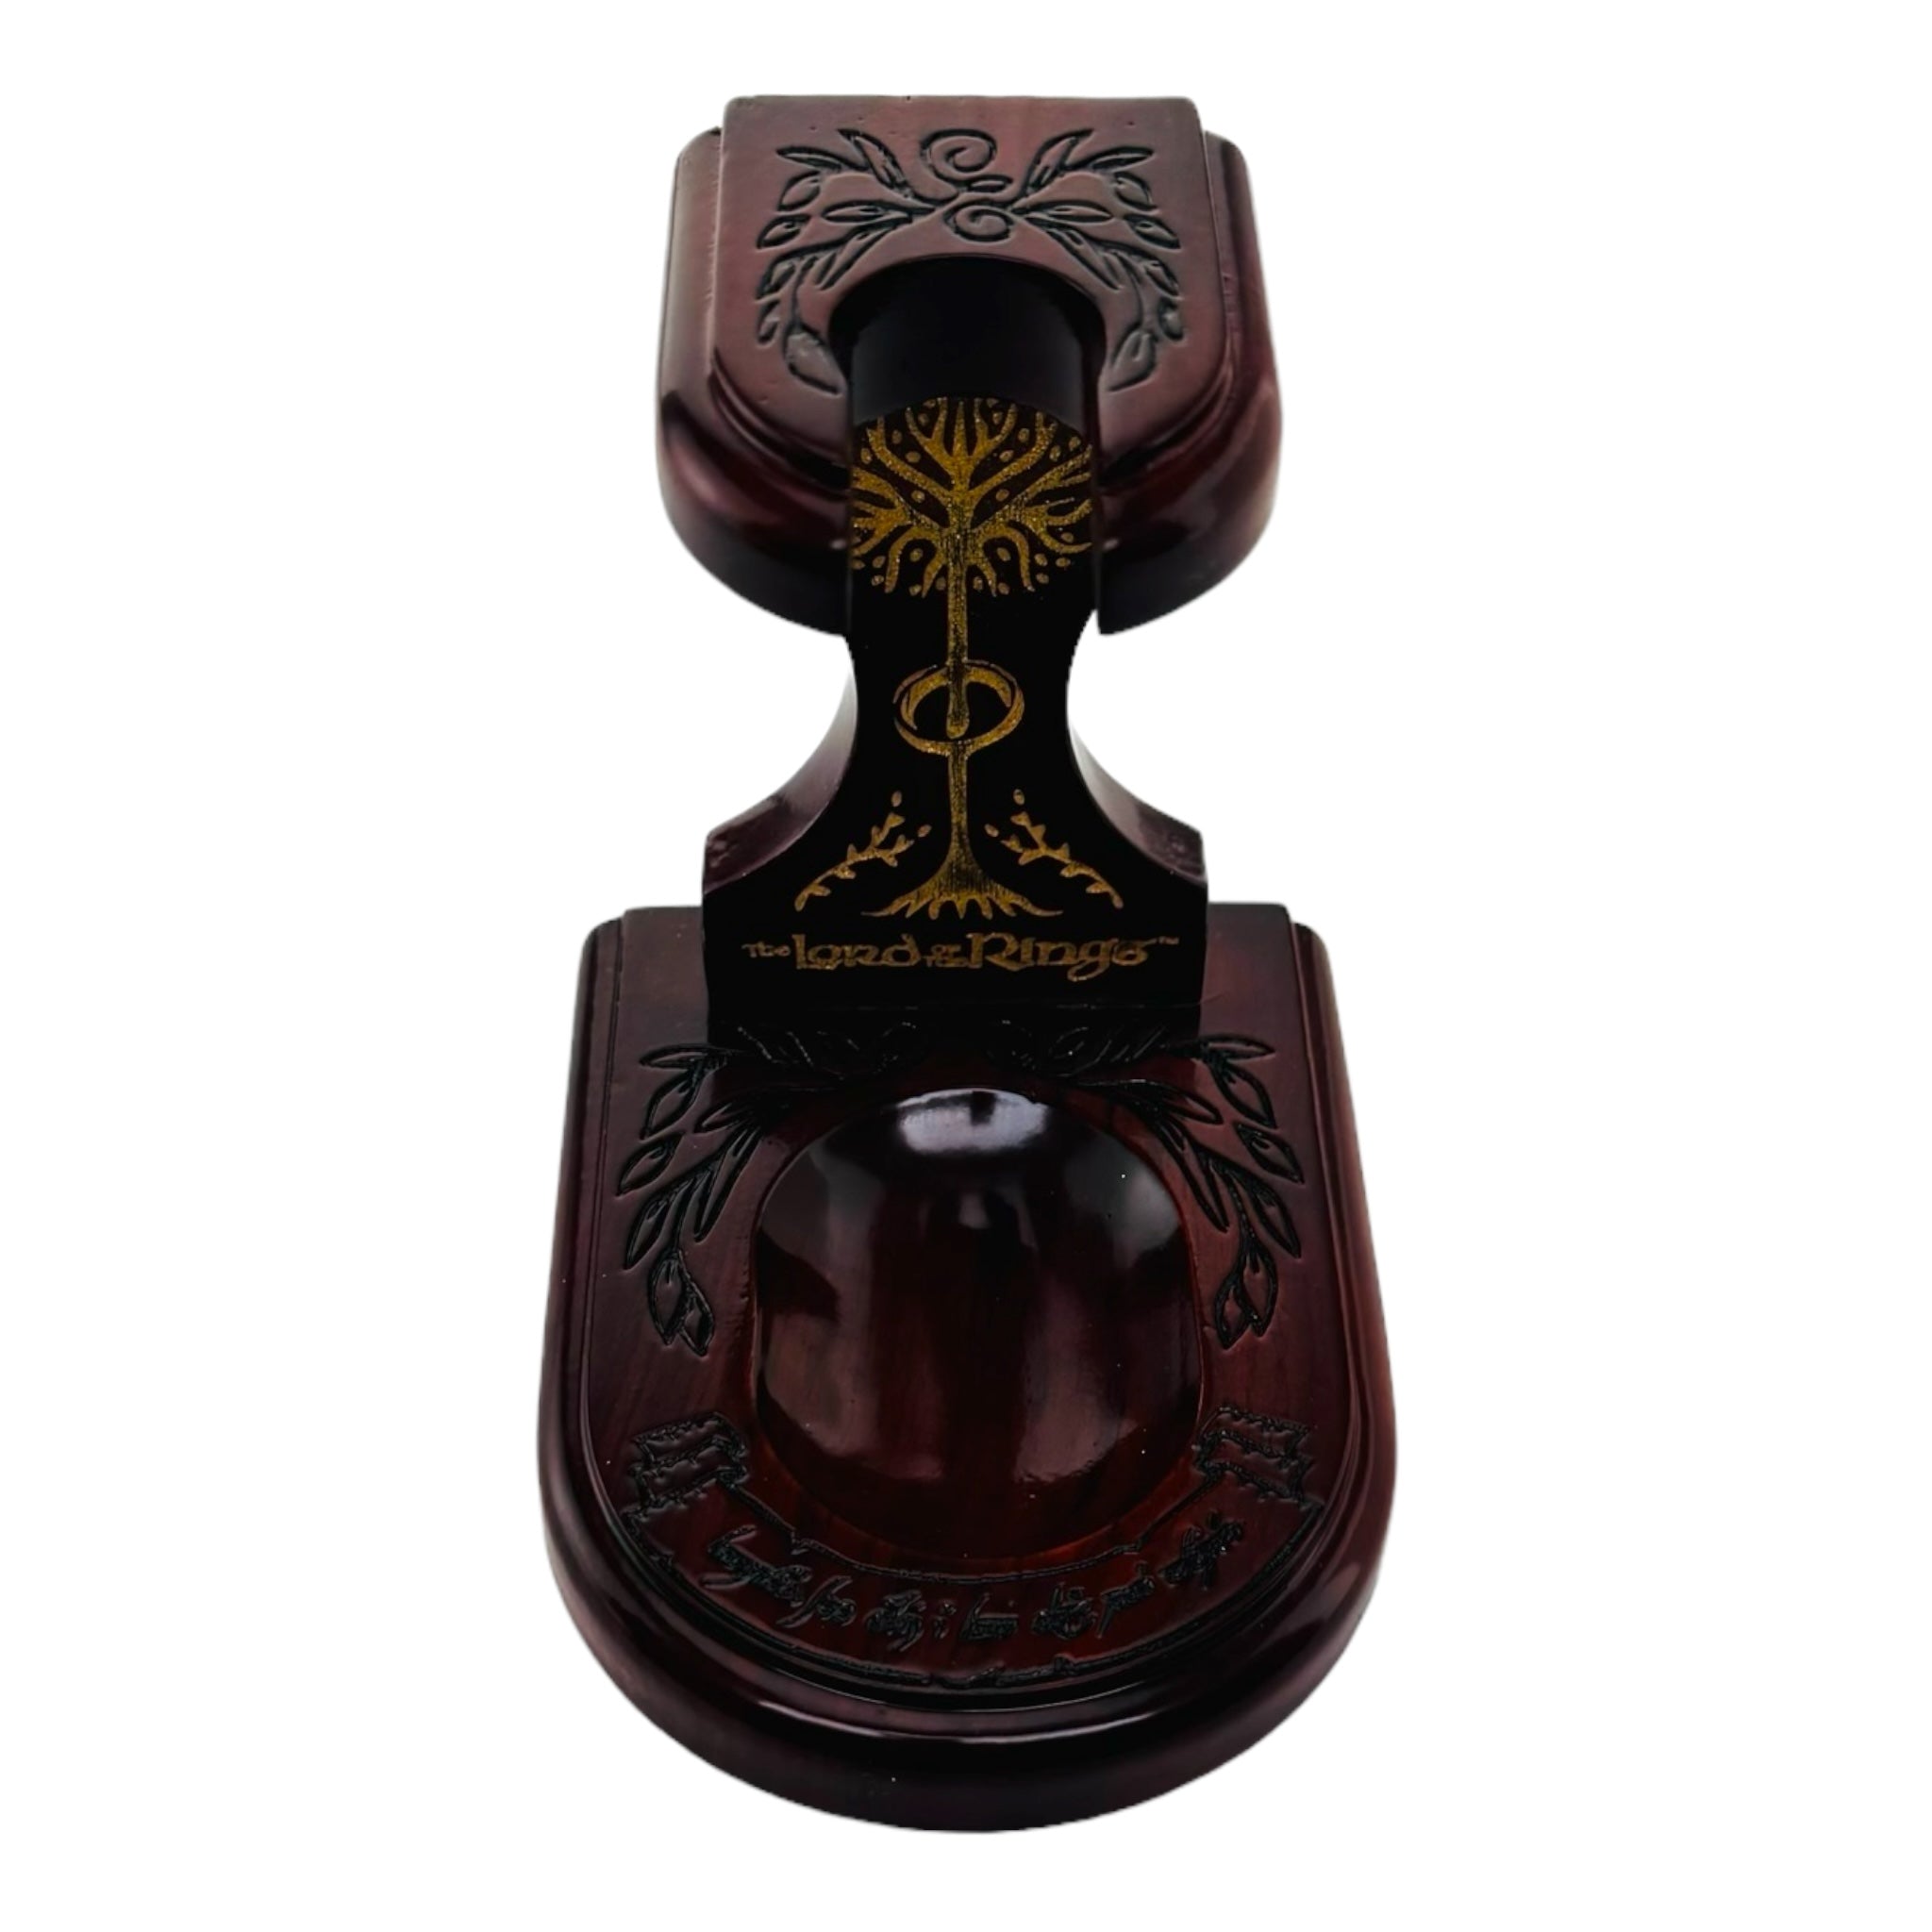 LOTR MIDDLE-EARTH Smoking Pipe Wood Display Stand By Shire Pipes